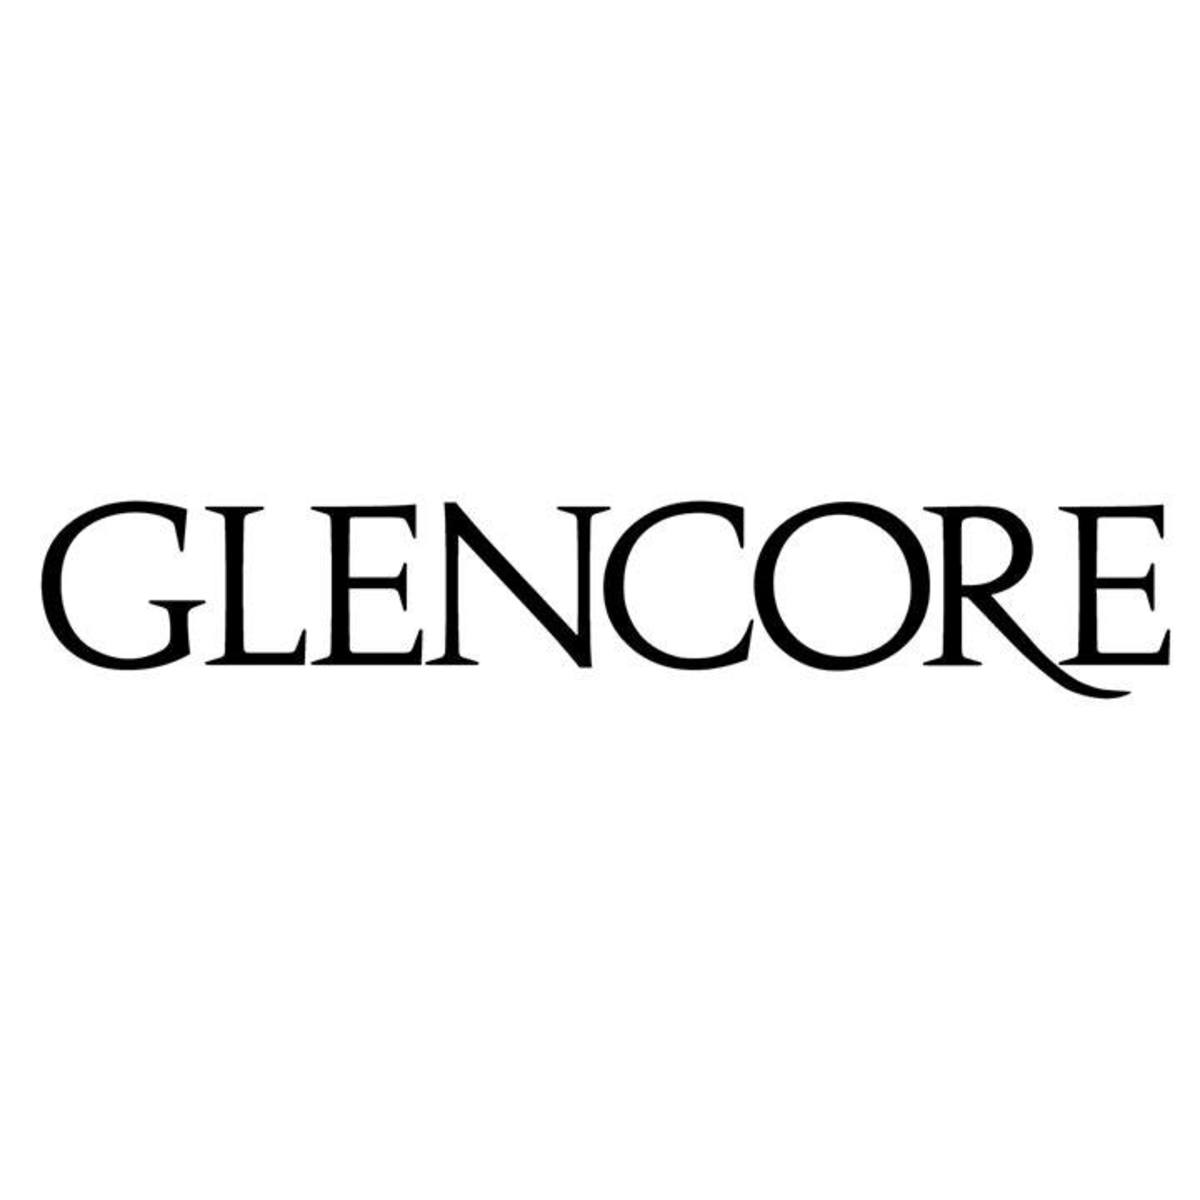 Analysis of Glencore's Information Systems Strategy